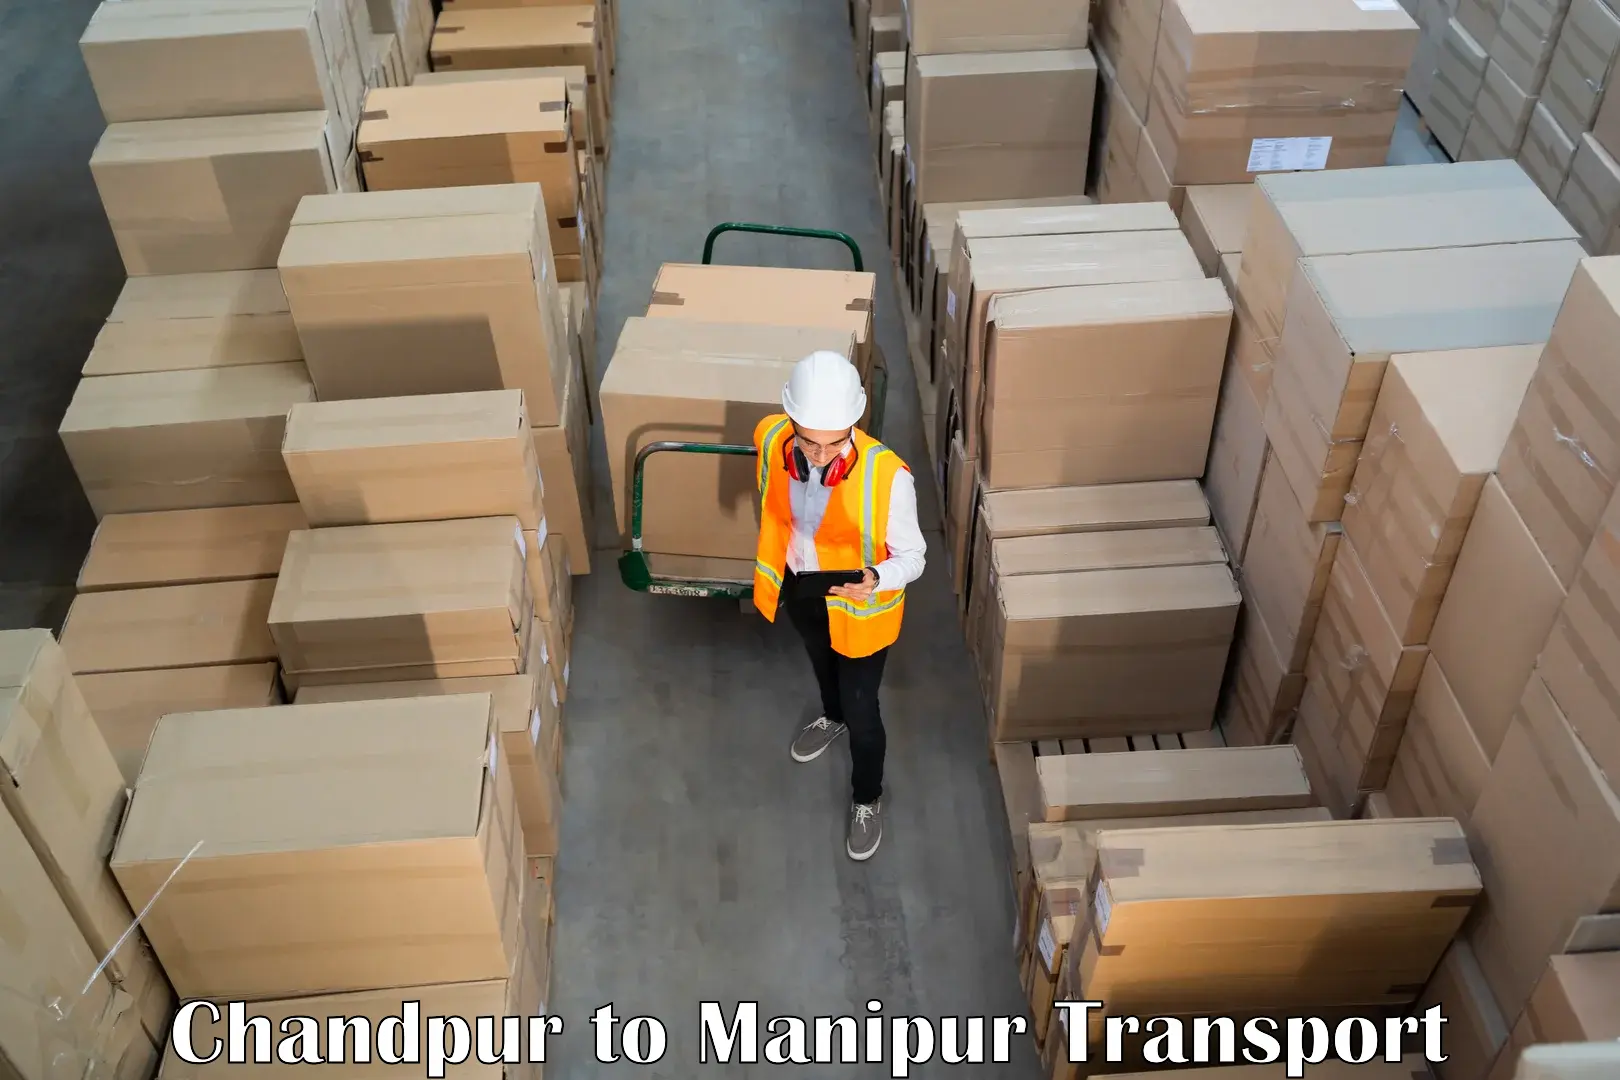 Part load transport service in India Chandpur to Manipur